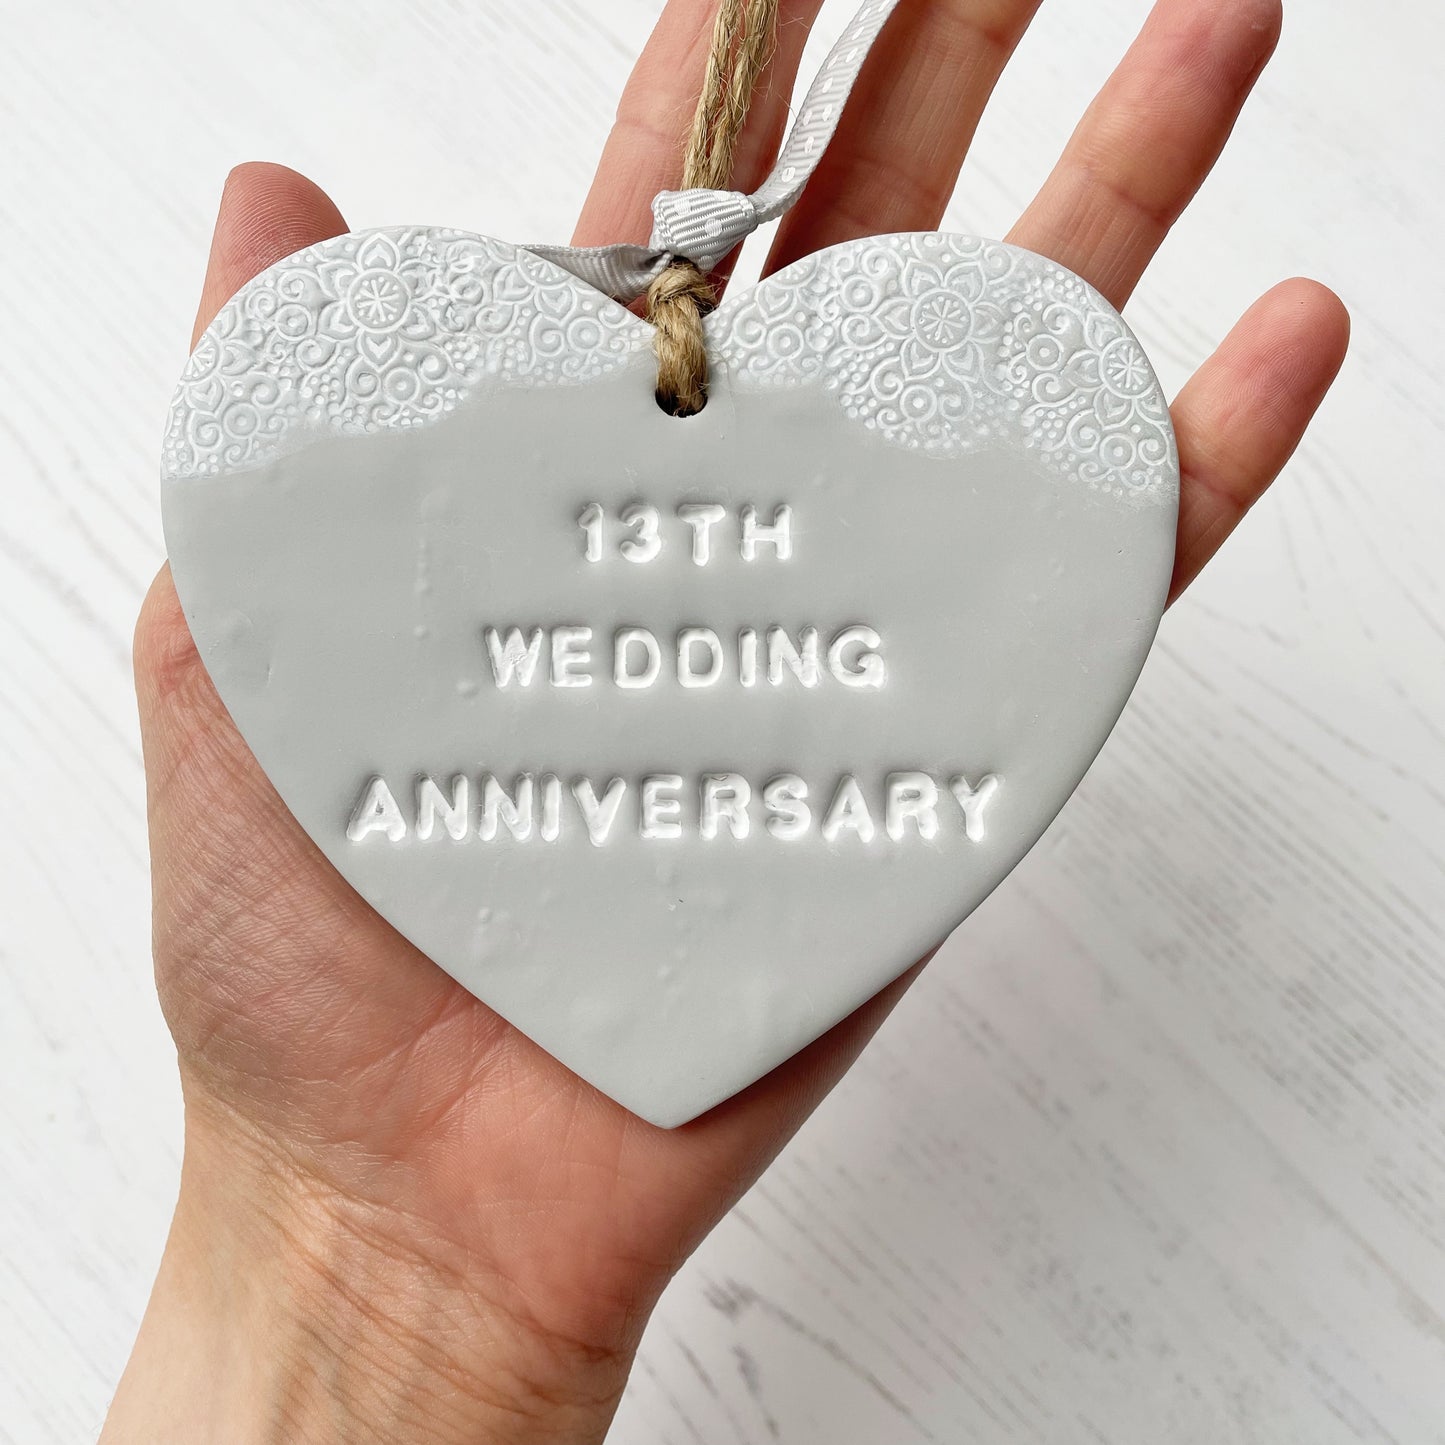 13th wedding anniversary gift, grey clay heart with a white lace edge at the top of the heart with jute twine for hanging, the heart is personalised with 13TH WEDDING ANNIVERSARY